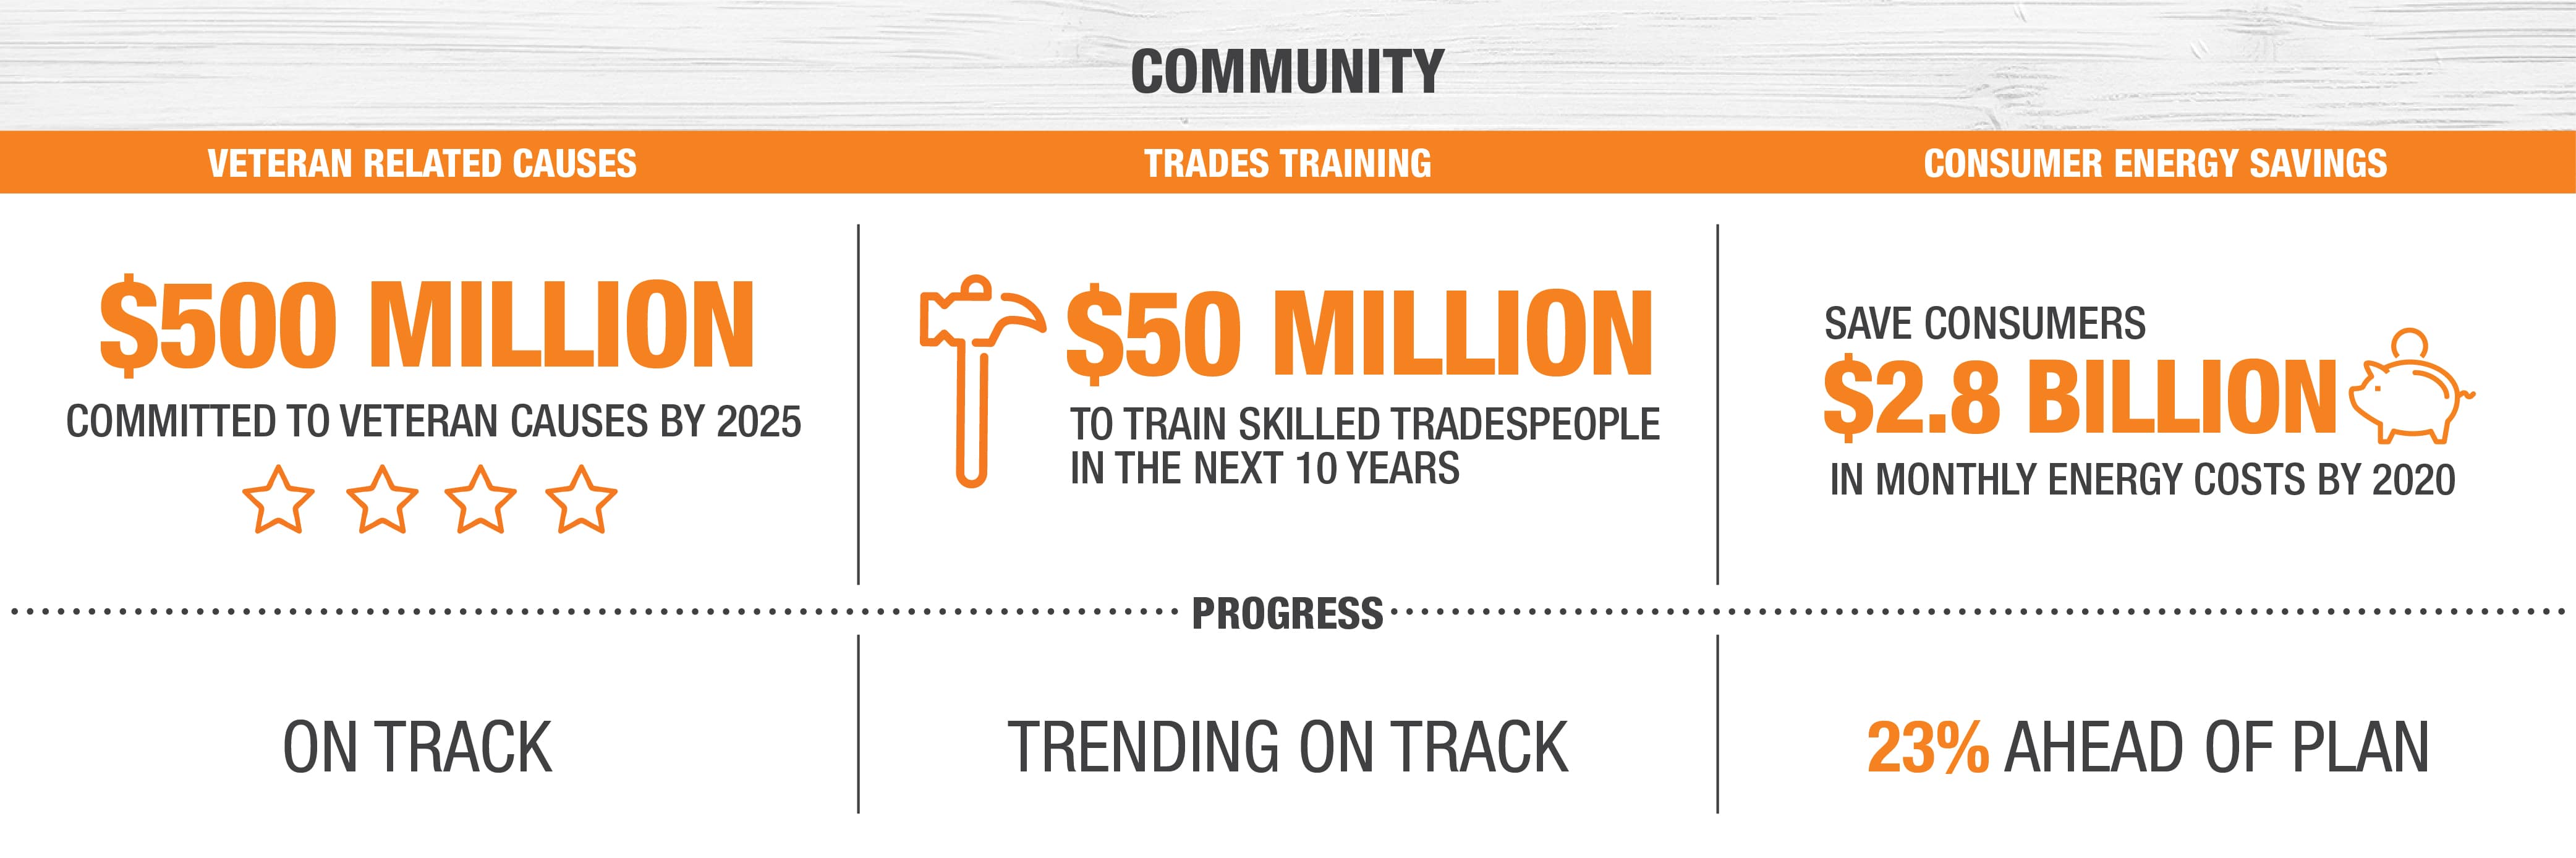 $500 million committed to veteran causes by 2025. $50 Million to train skilled tradespeople in the next 10 years. Save consumers $2.8 Billion in monthly energy costs by 2020. 